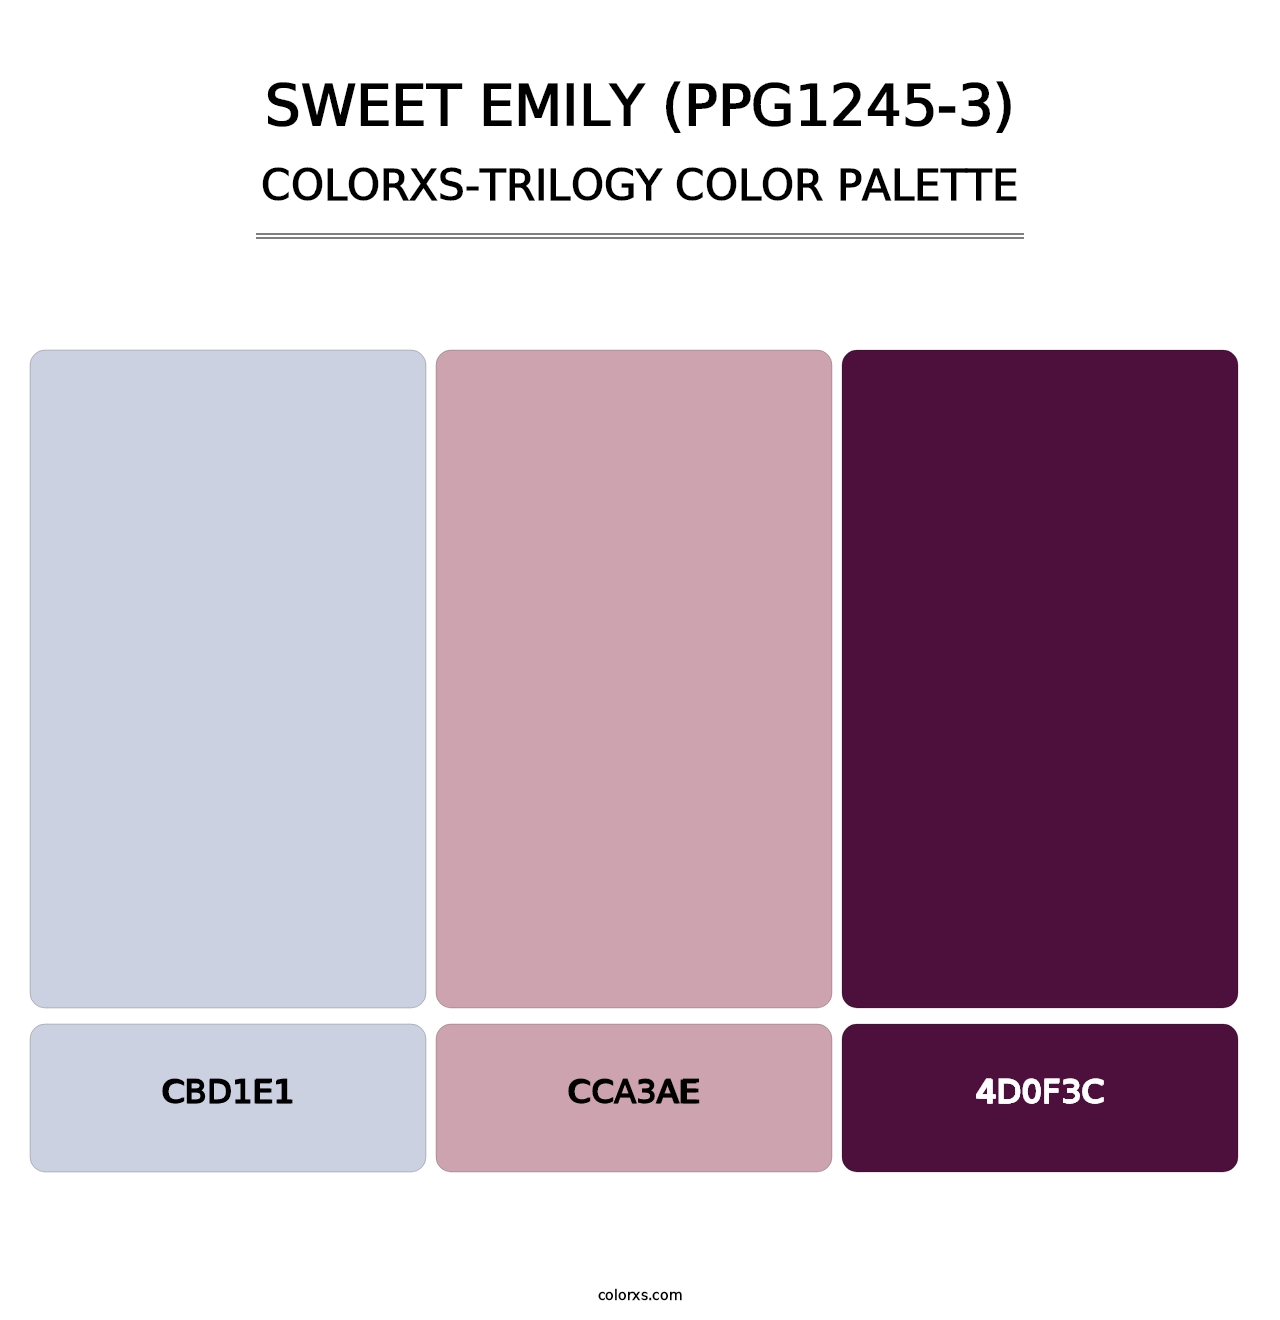 Sweet Emily (PPG1245-3) - Colorxs Trilogy Palette